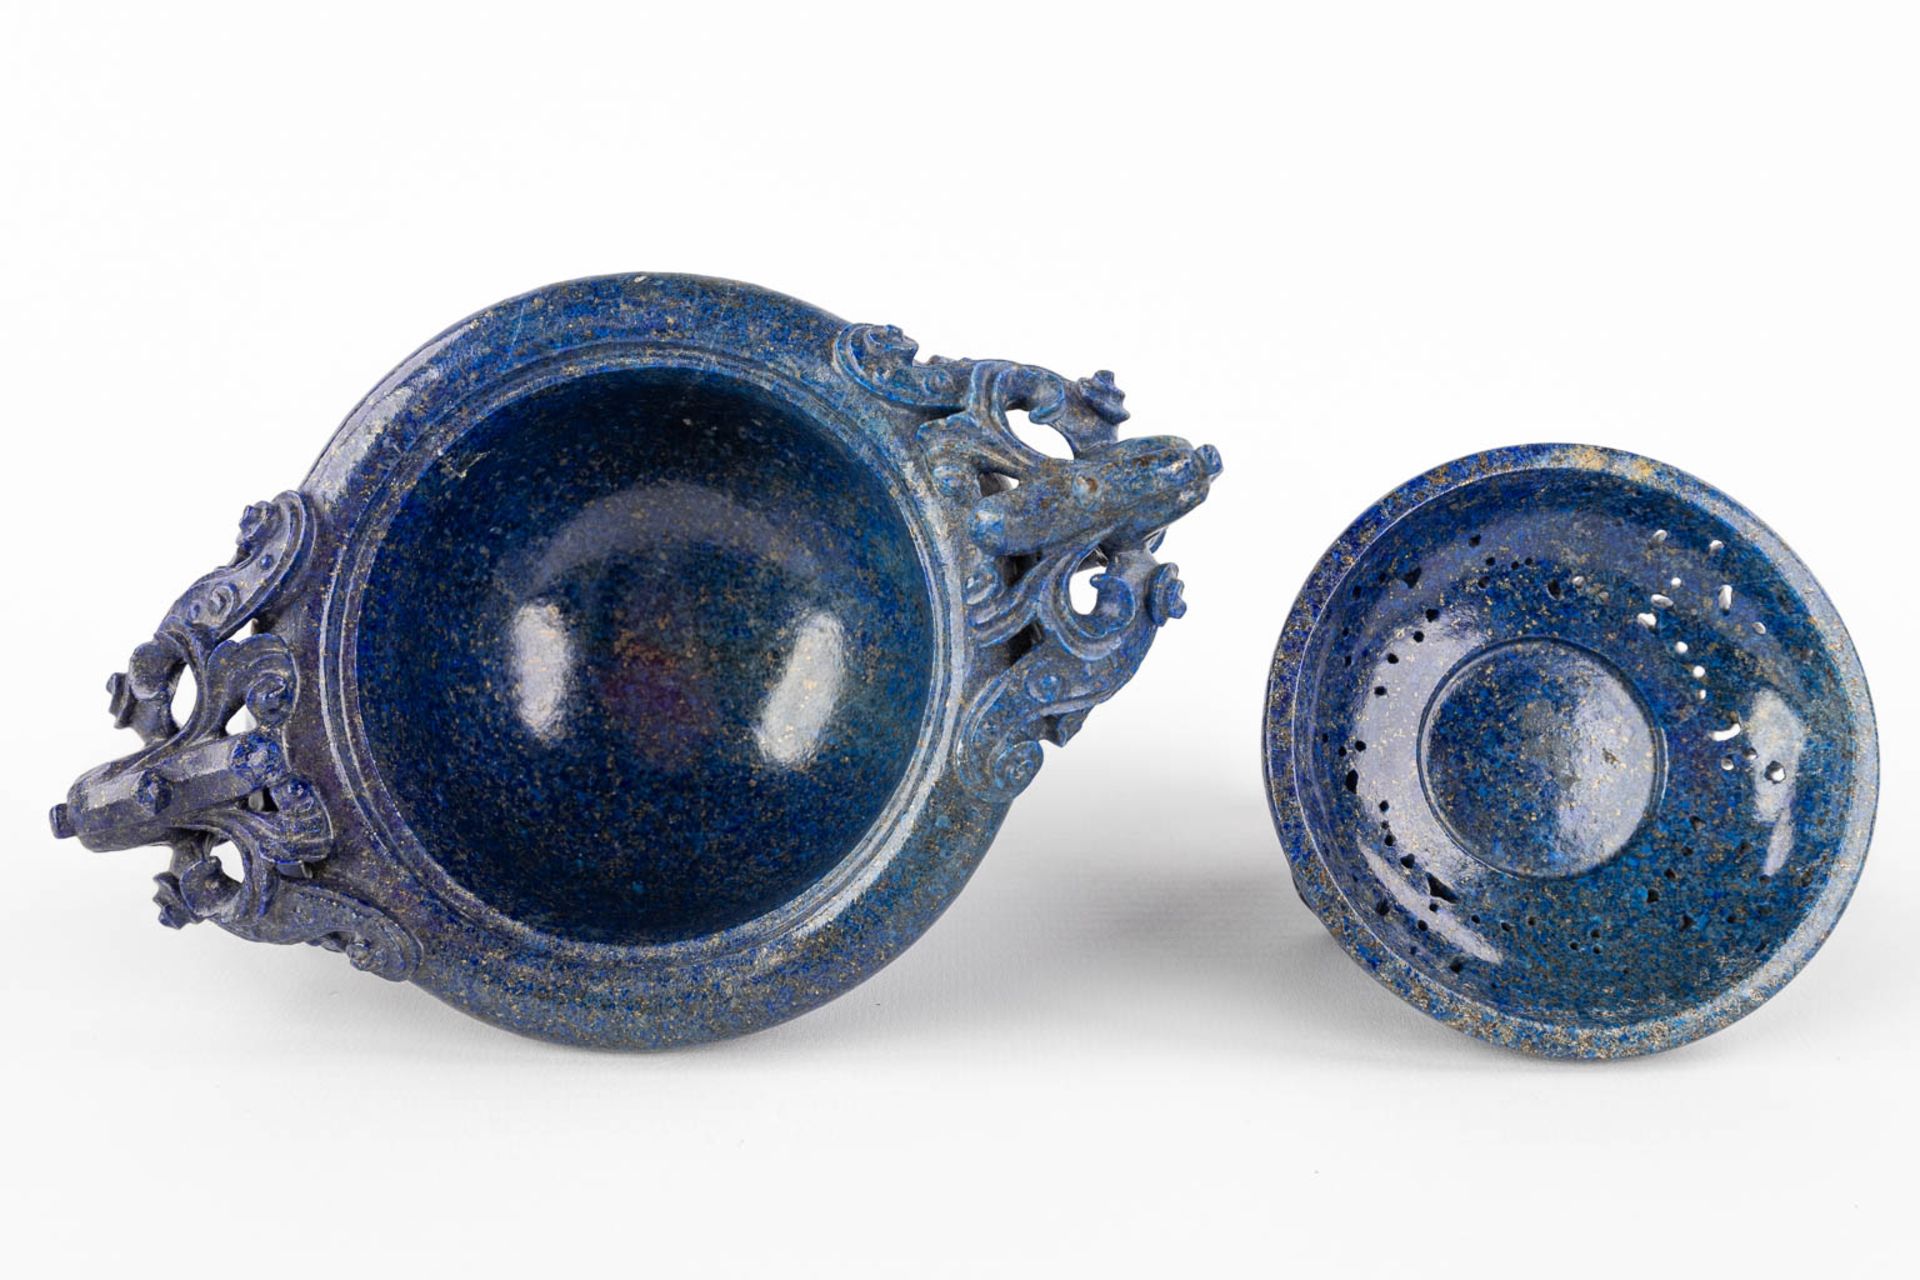 A Chinese censer, sculptured Lapis Lazuli, decorated with birds and flowers. (D:11 x W:17 x H:14 cm) - Image 7 of 11